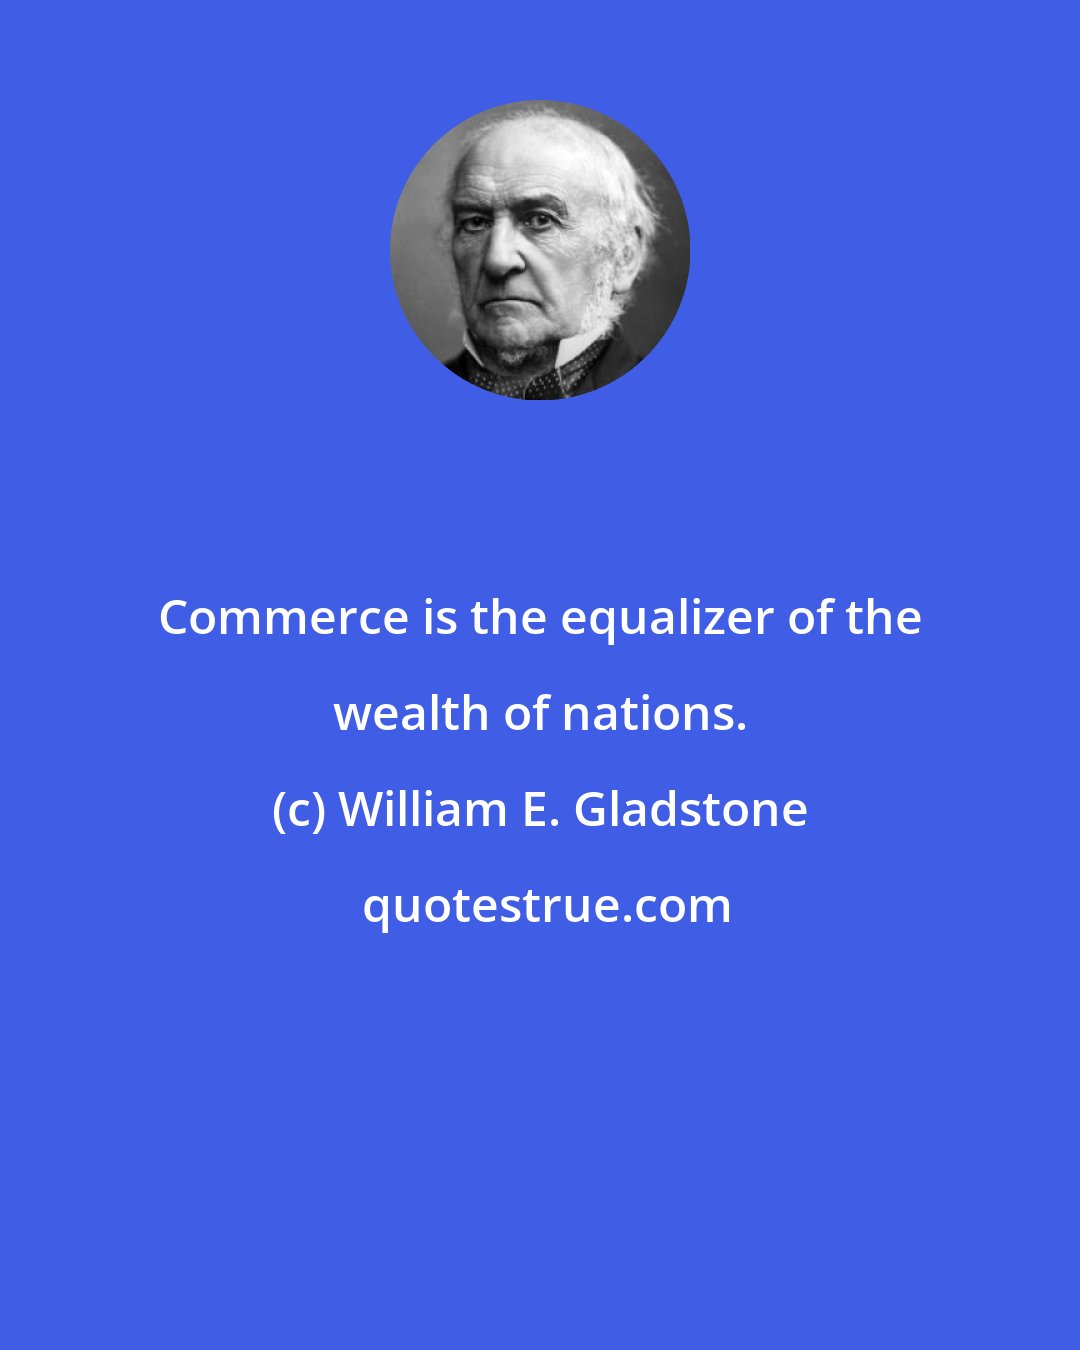 William E. Gladstone: Commerce is the equalizer of the wealth of nations.